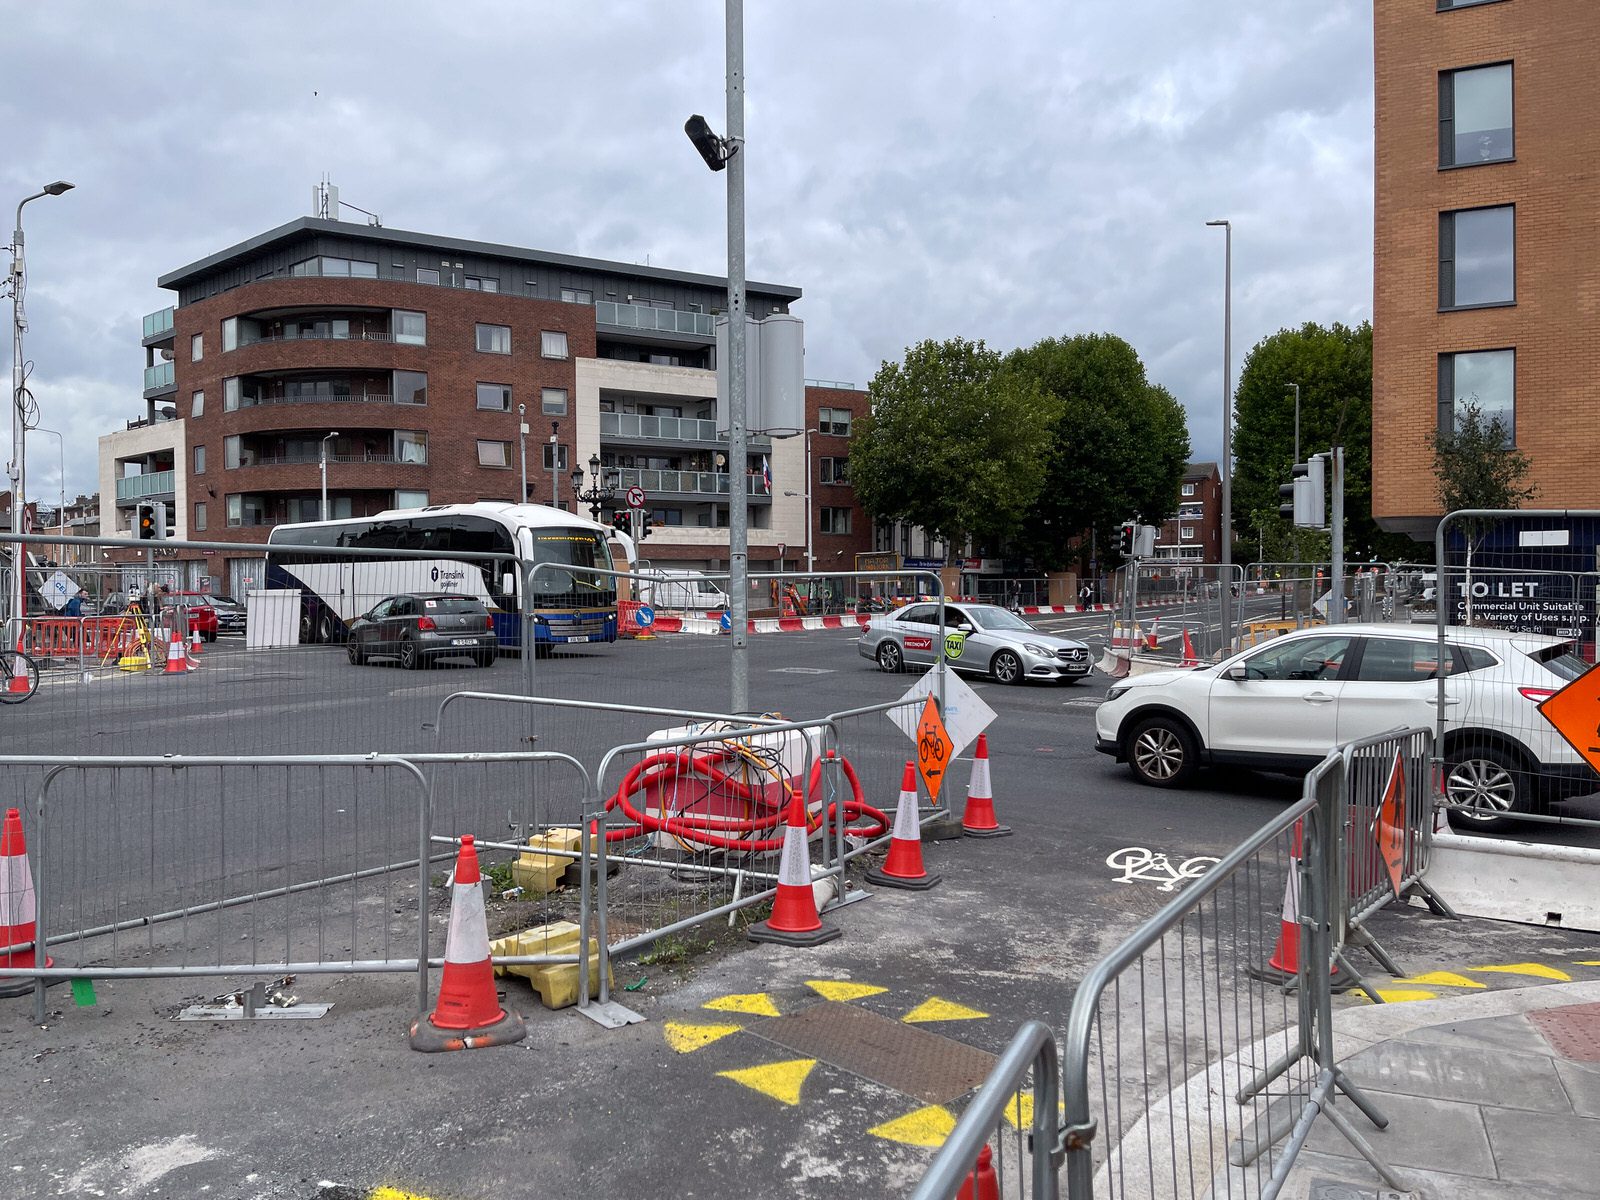 THE CLONTARF TO CITY CENTRE CYCLE AND BUS PRIORITY PROJECT [AMIENS STREET SECTION STILL A WORK IN PROGRESS] 009